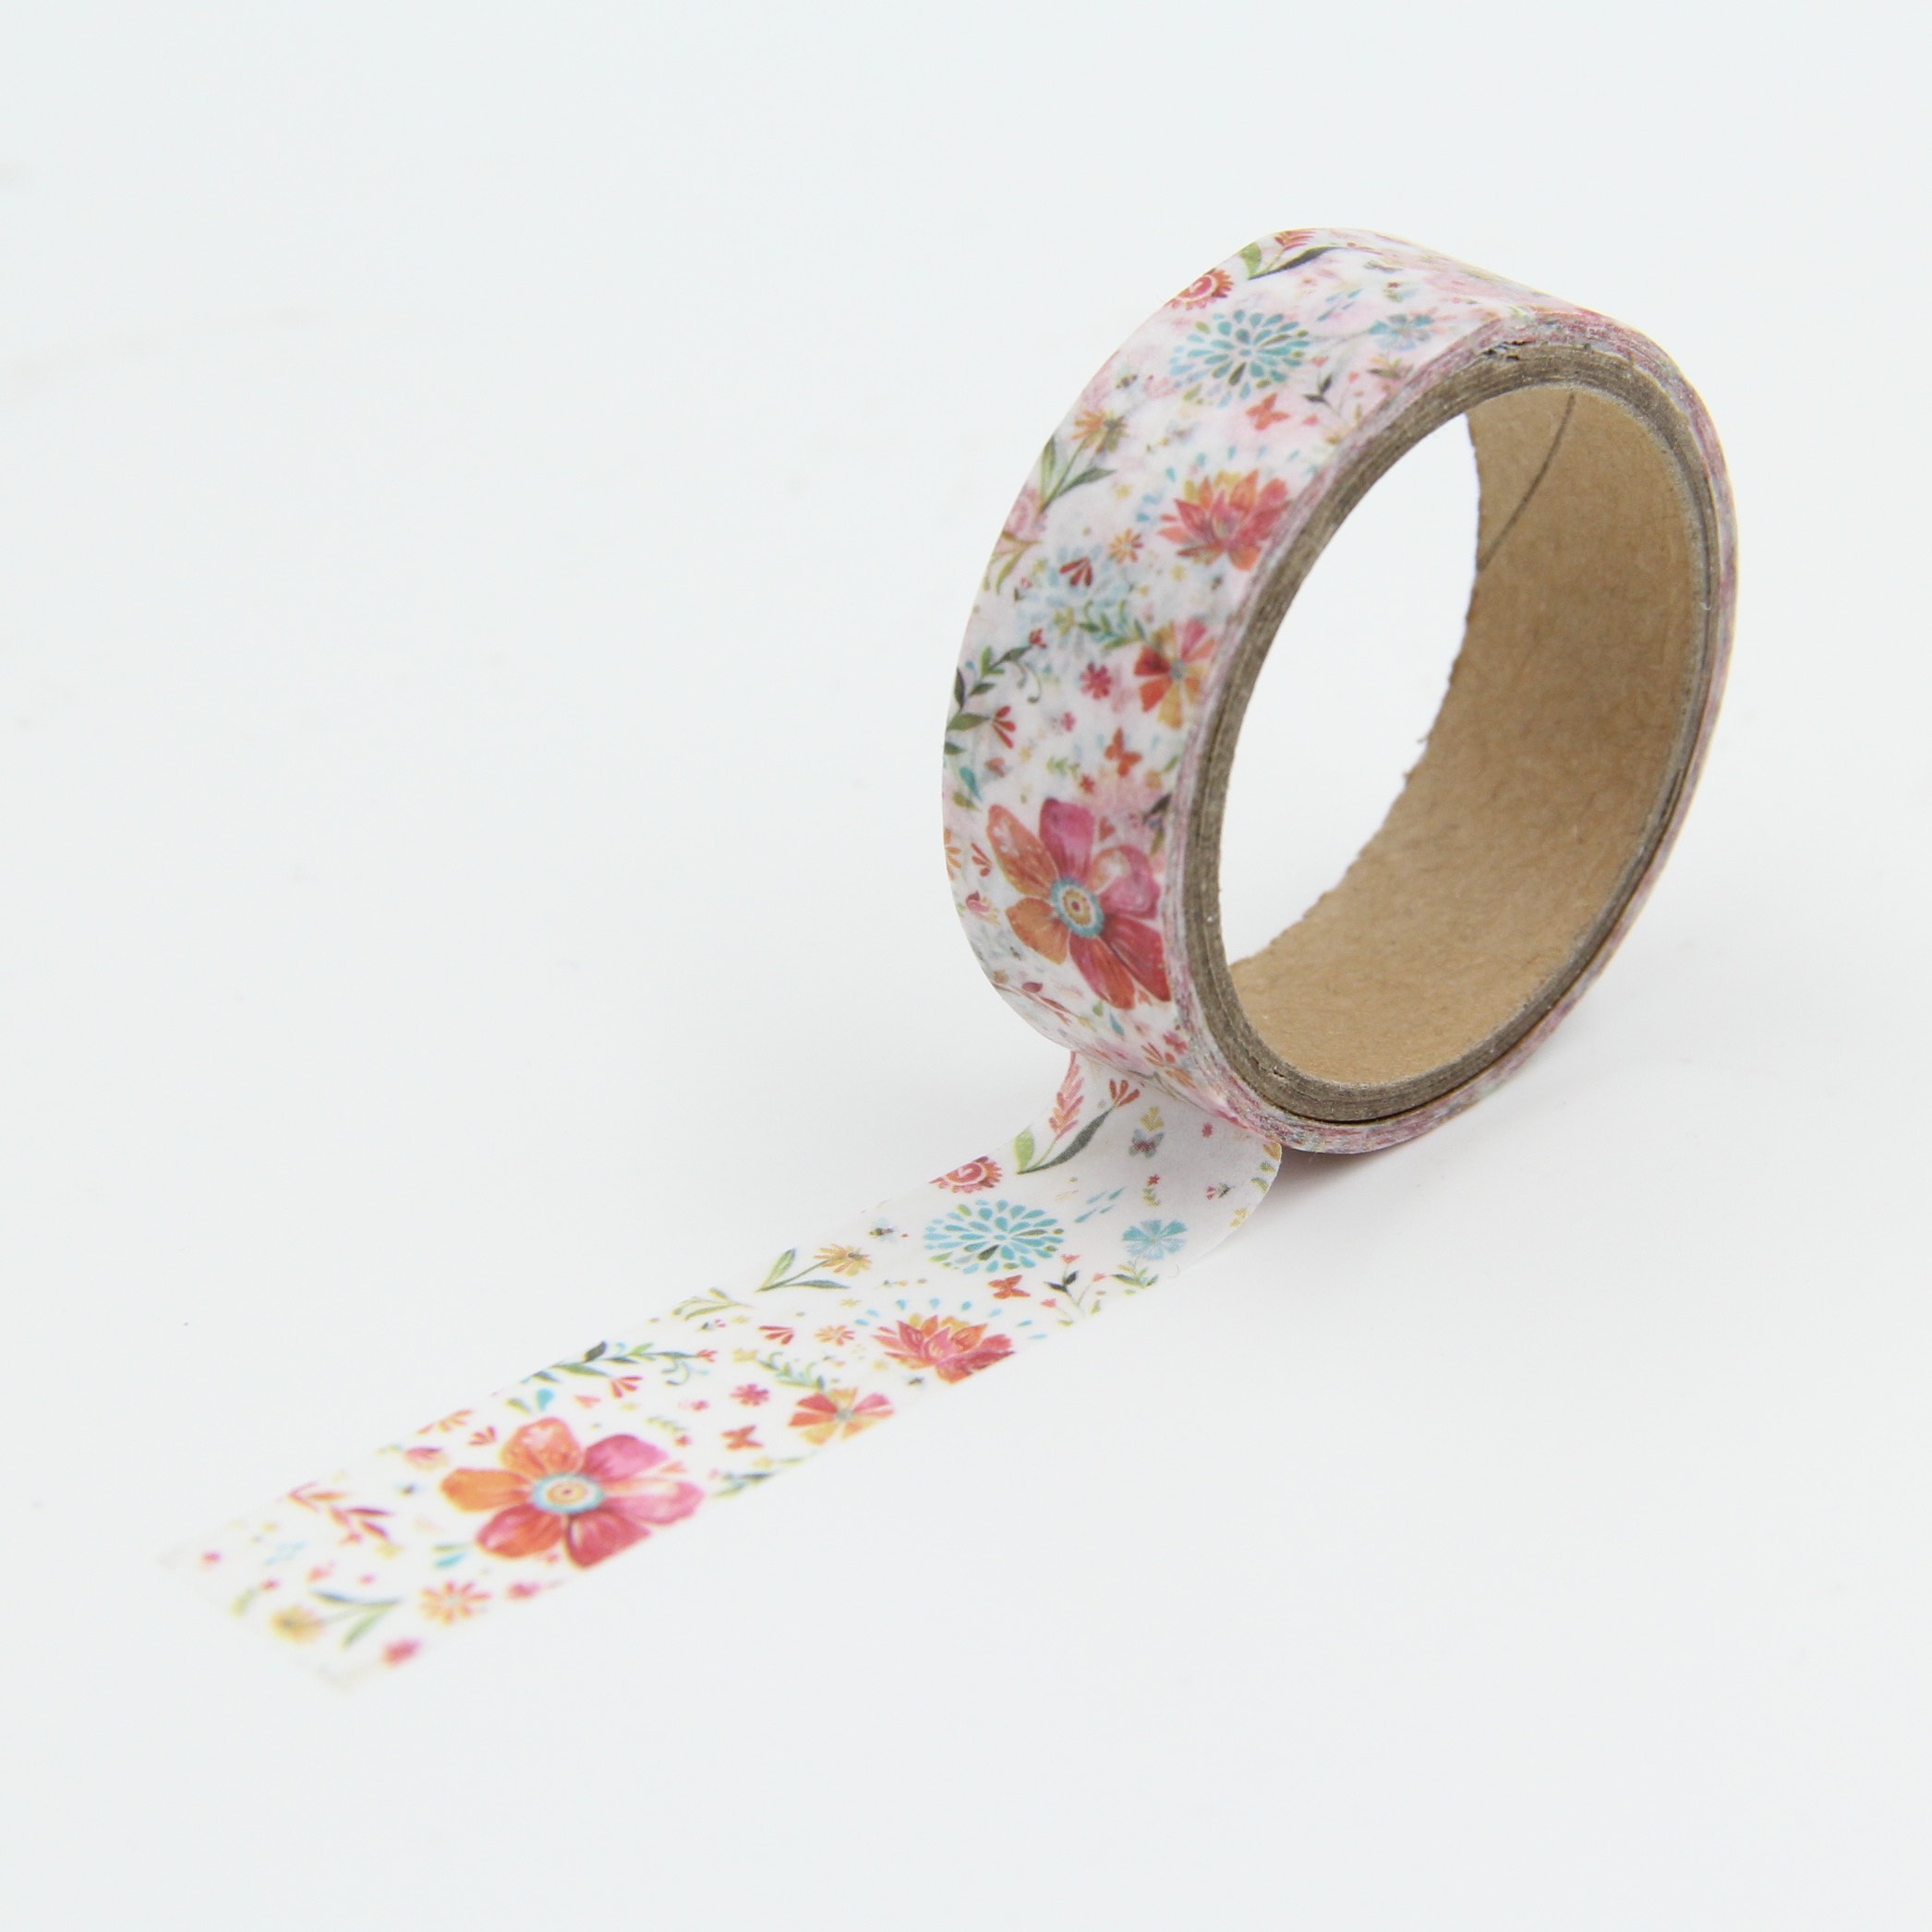 White Beautiful Retro Flower Washi Paper Masking Tapes DIY Tape Scrapbooking Sticker Decorative Stickers Party Favors